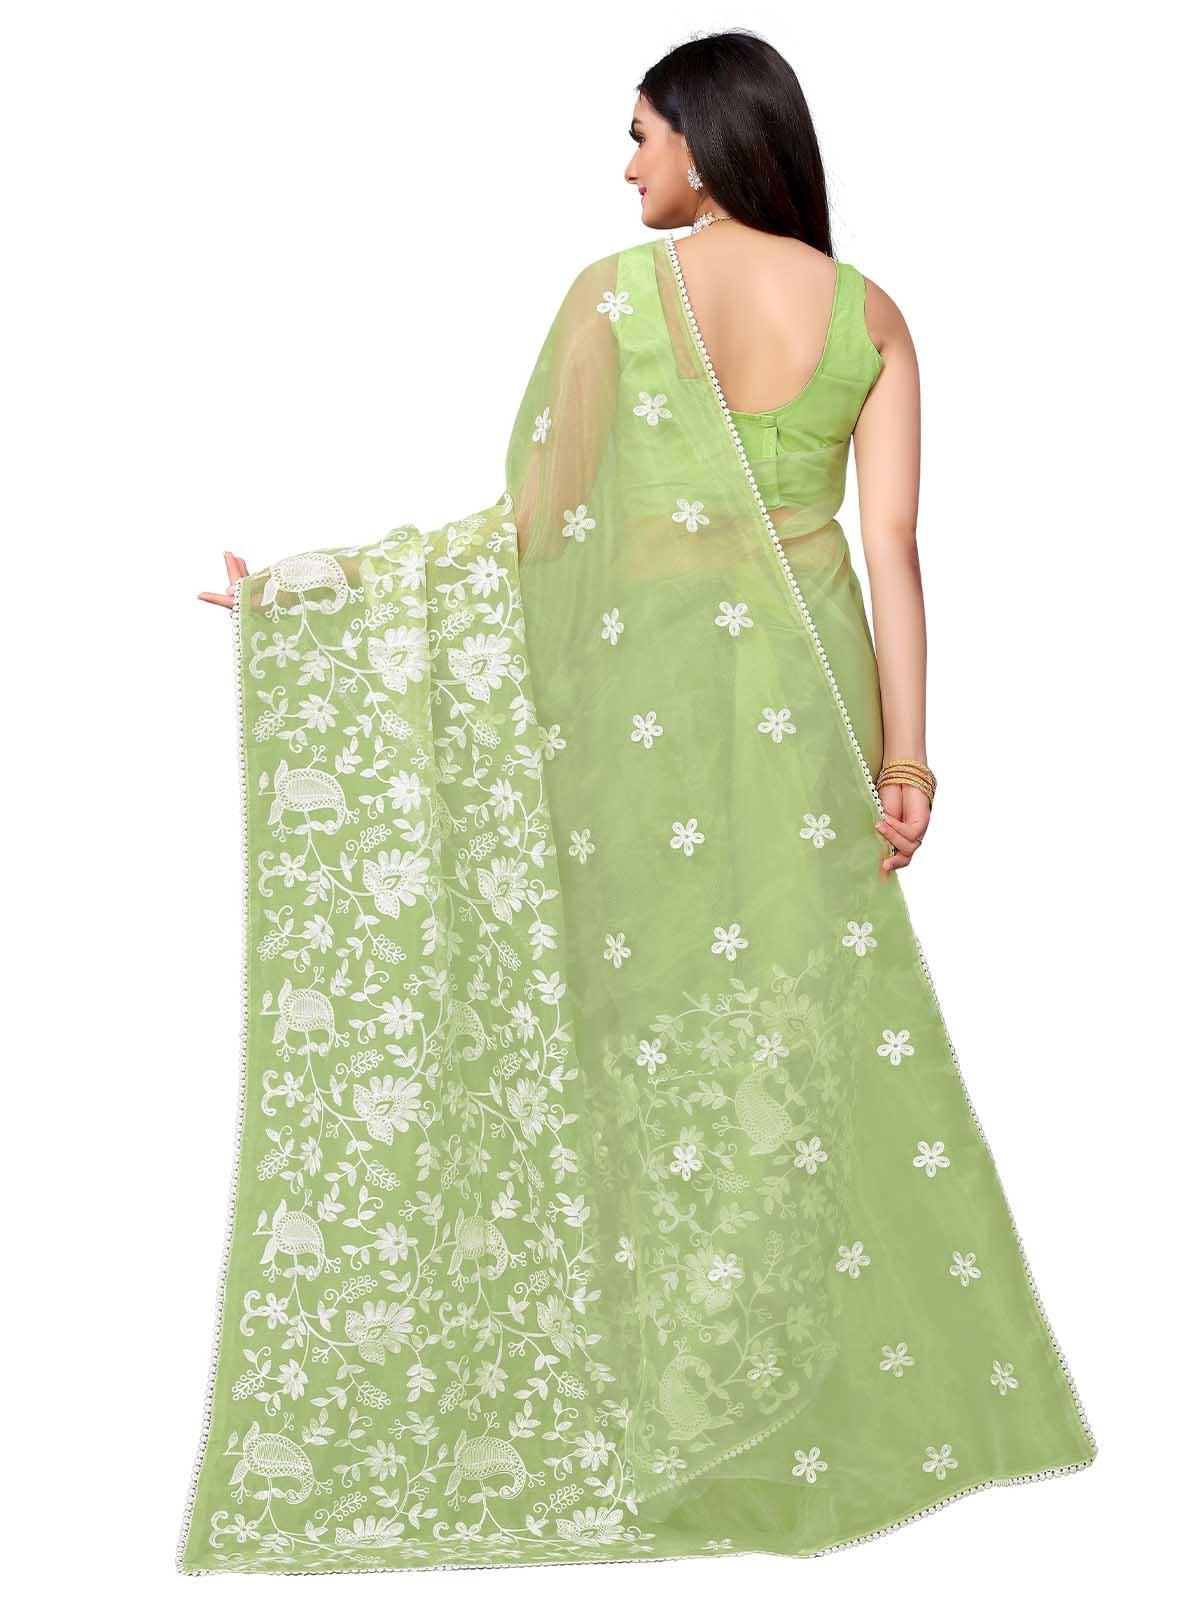 Women's Green Organza Embroidered Saree With Blouse - Odette